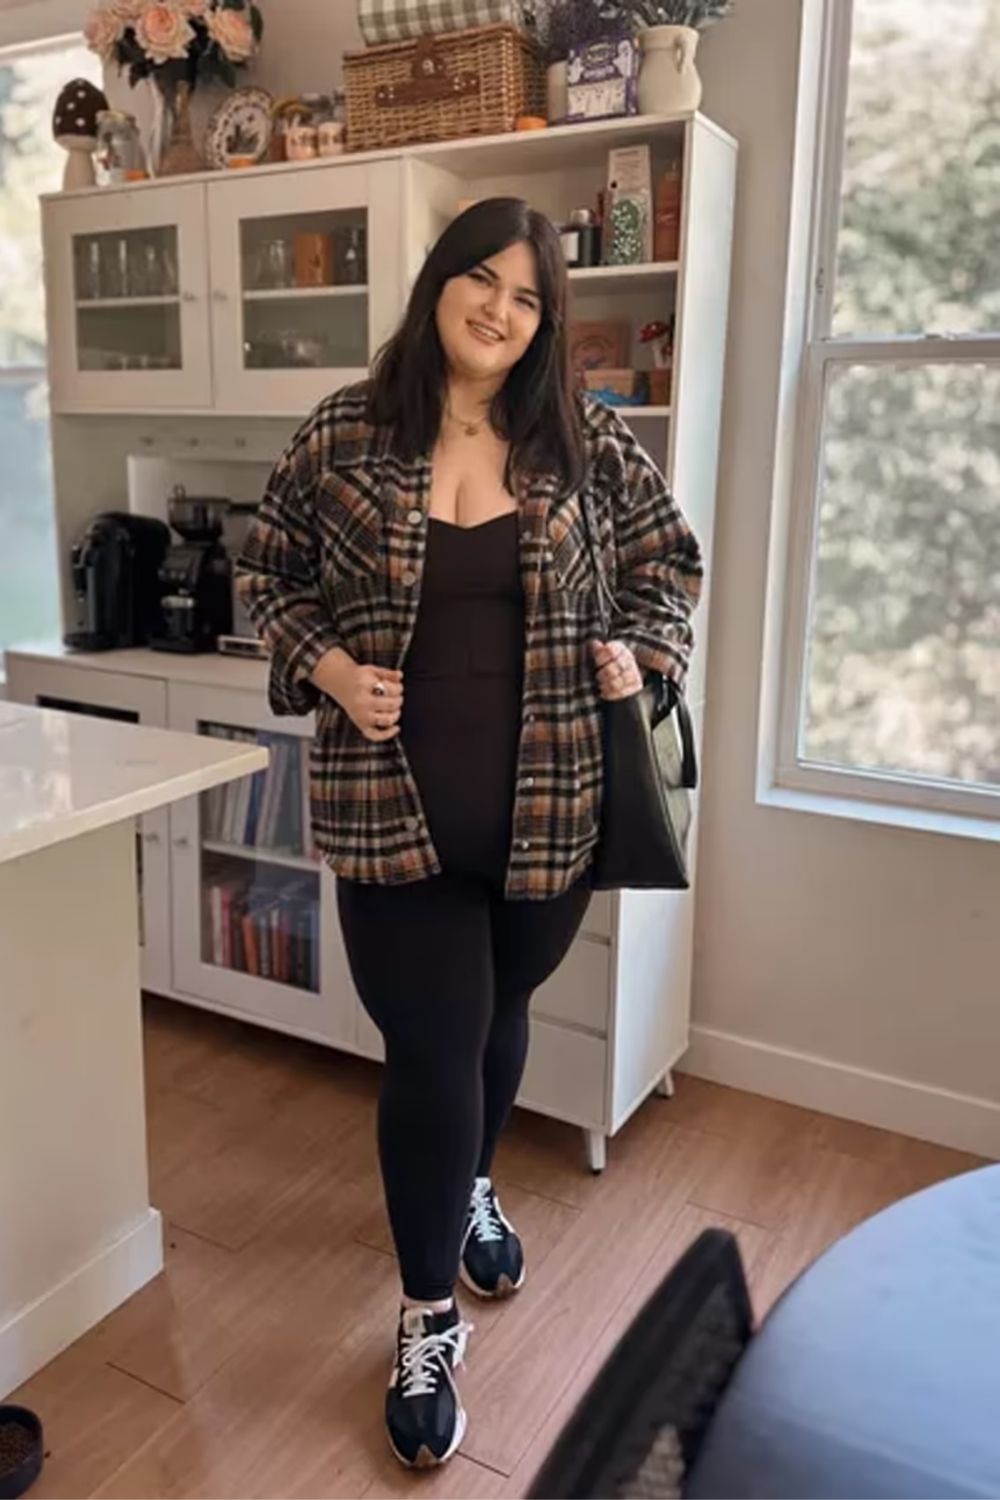 The ensemble effortlessly blends an oversized plaid shirt with chic black layers, complemented by the contrast of tight leggings and structured shoes for a stylish and comfortable look.